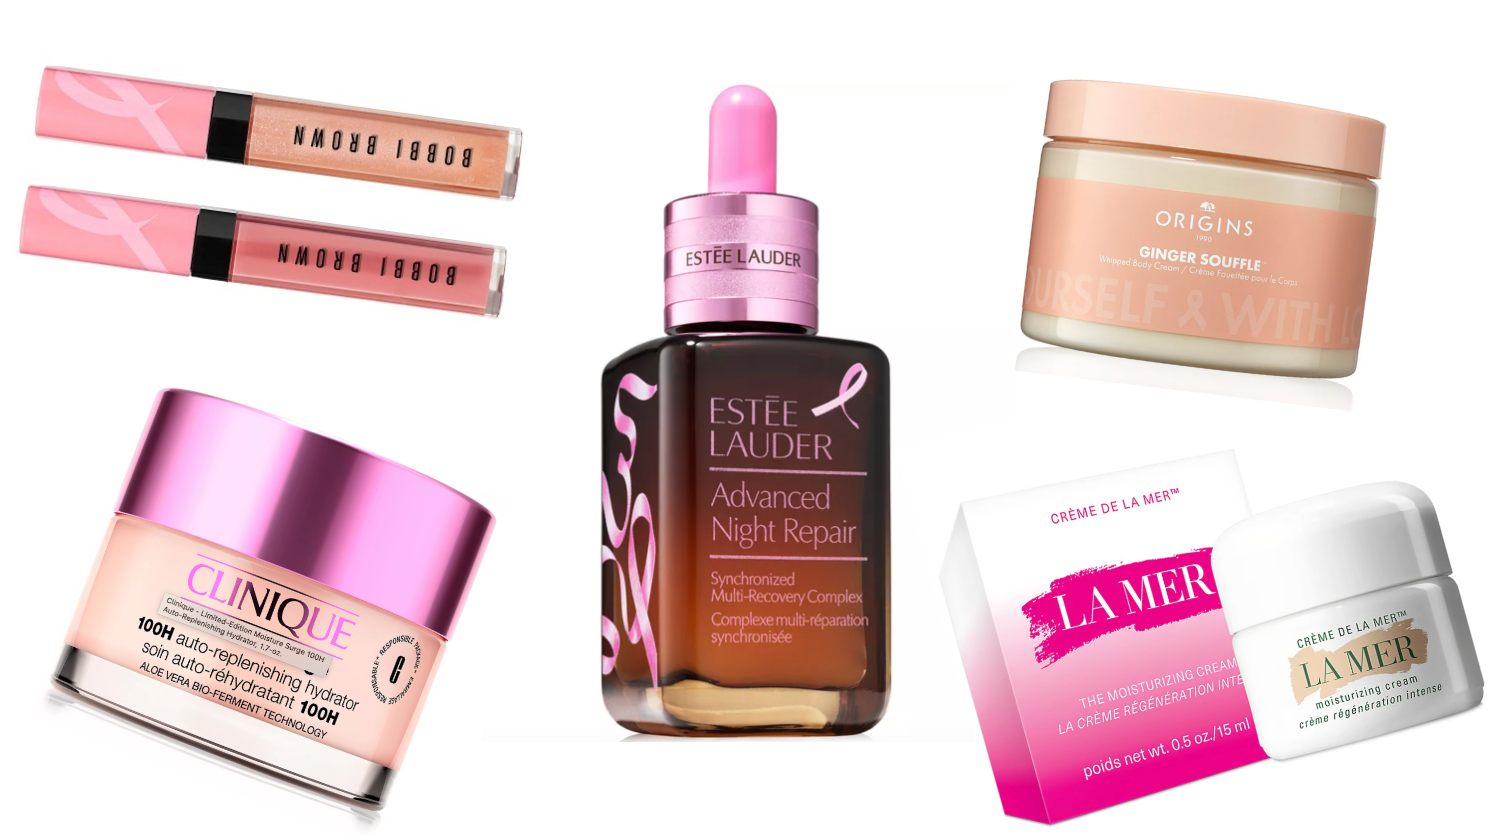 As you may know, October is Breast Cancer Awareness Month. Many beauty brands joined together to spread awareness and created limited-edition products to help raise awareness and gather funds for breast cancer charities and organizations. 